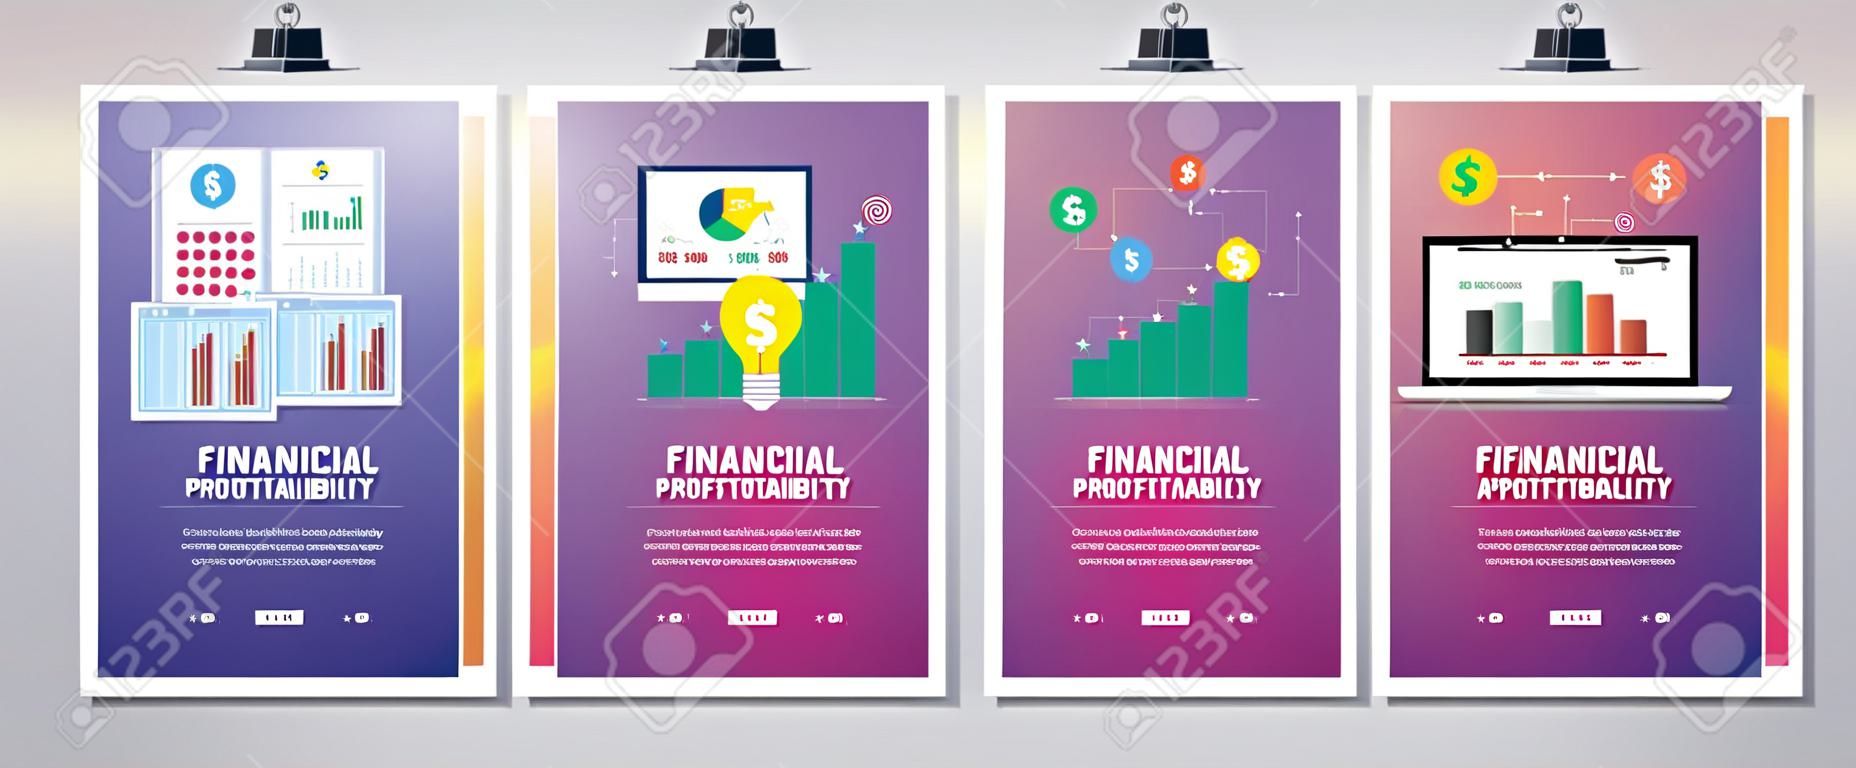 Web banners concept in vector with financial profitability, financial application, expertise investment and stock market investor. Internet website banner concept with icon set. Flat design vector illustration.